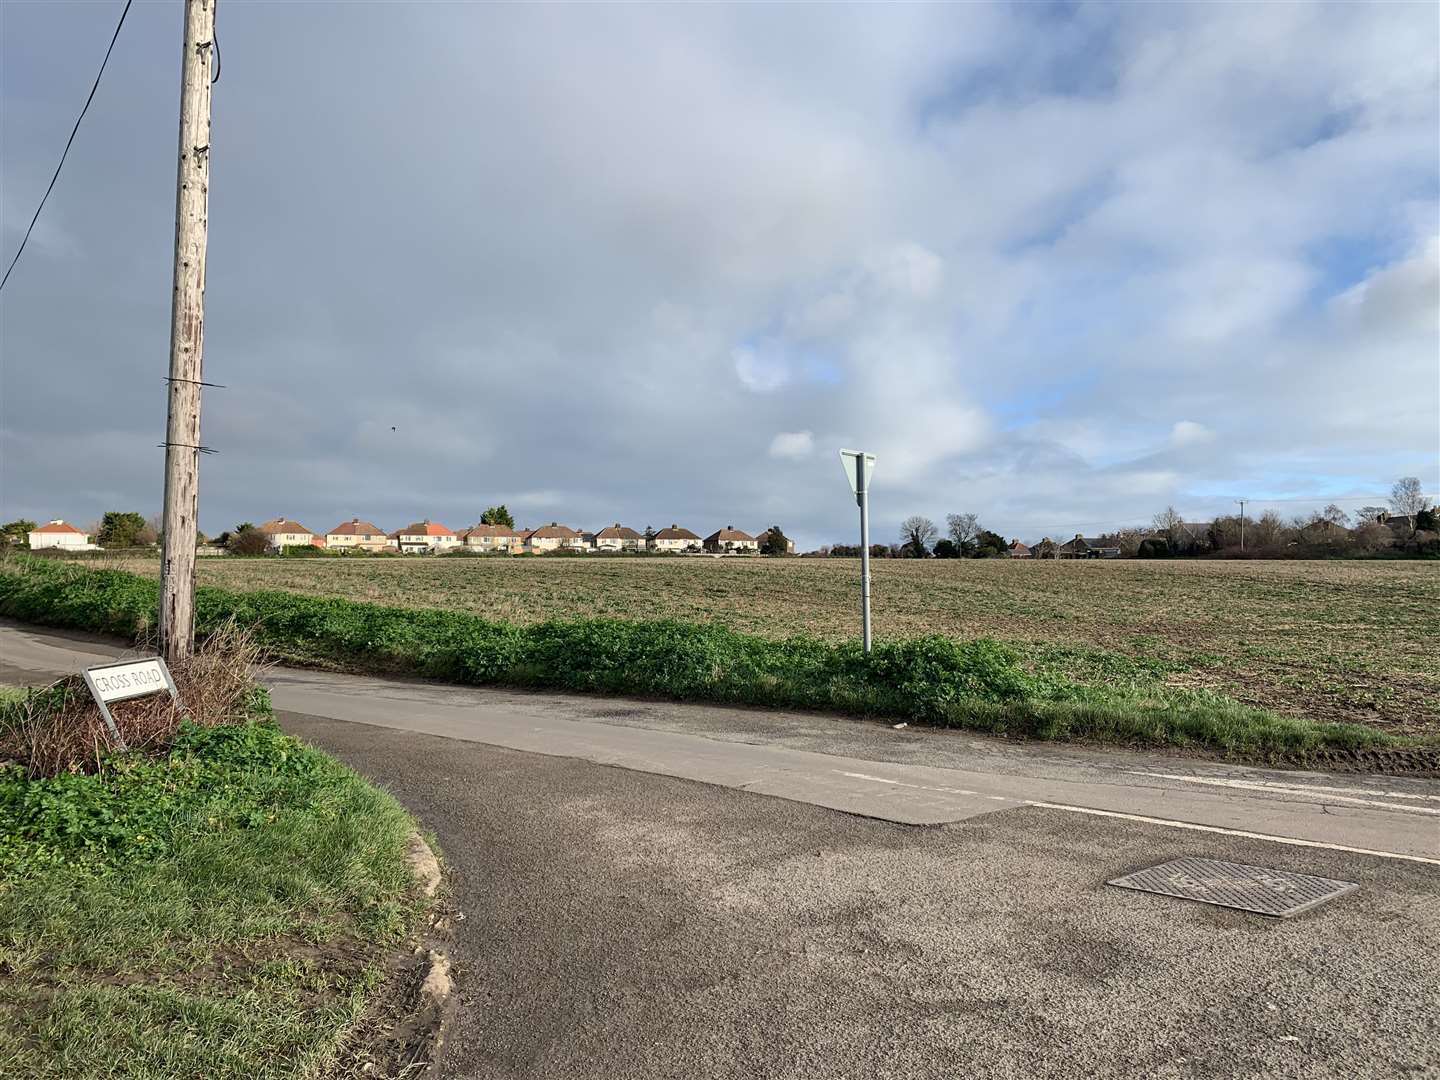 The site earmarked for 100 new homes at Cross Road with Lydia Road in the background